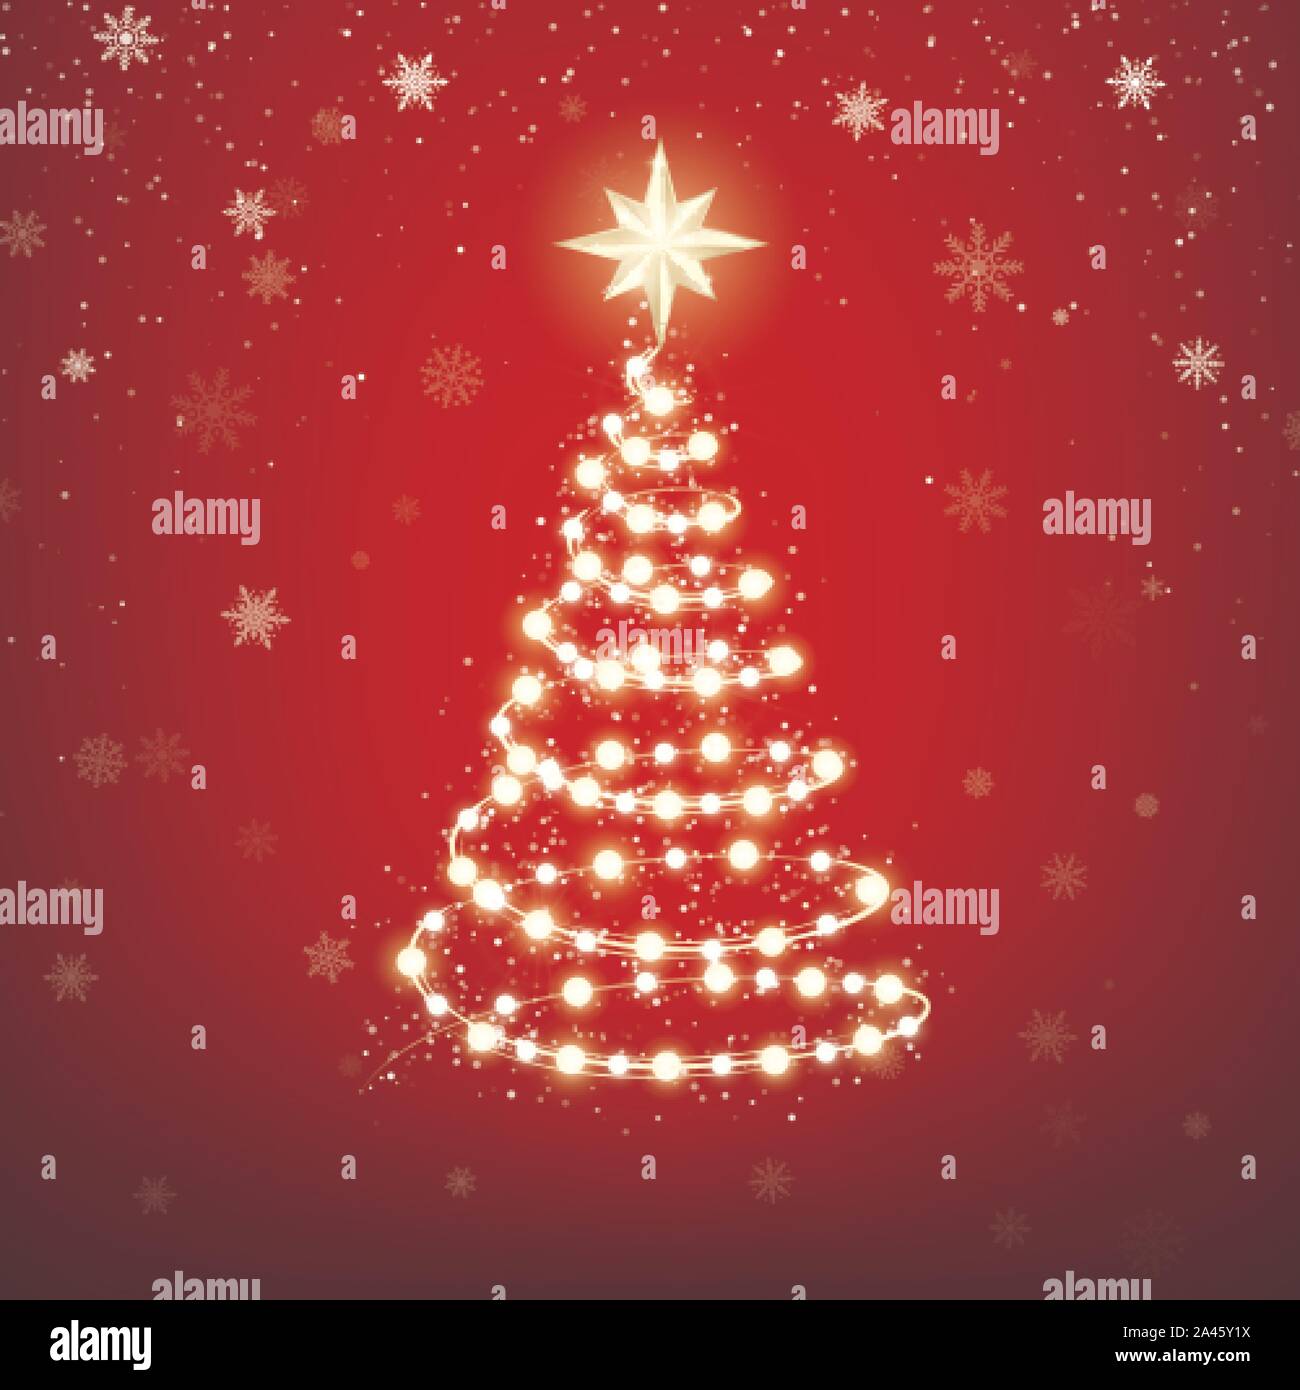 Garland in form of Christmas tree with star on red background ...